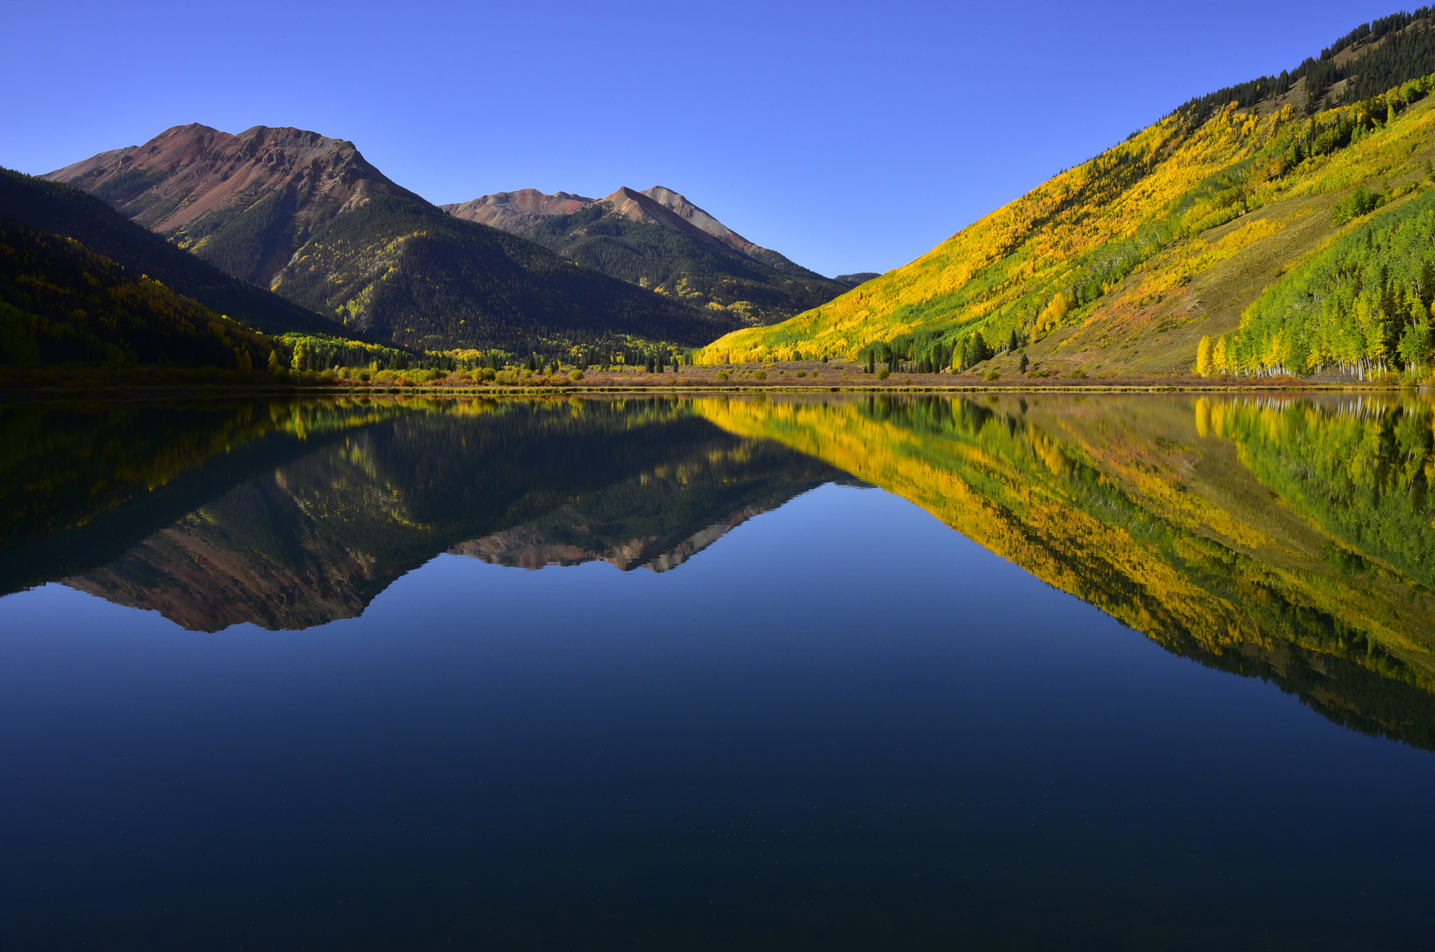 A near-perfect reflection in Crystal Lake  -  Uncompahgre National Forest, Colorado